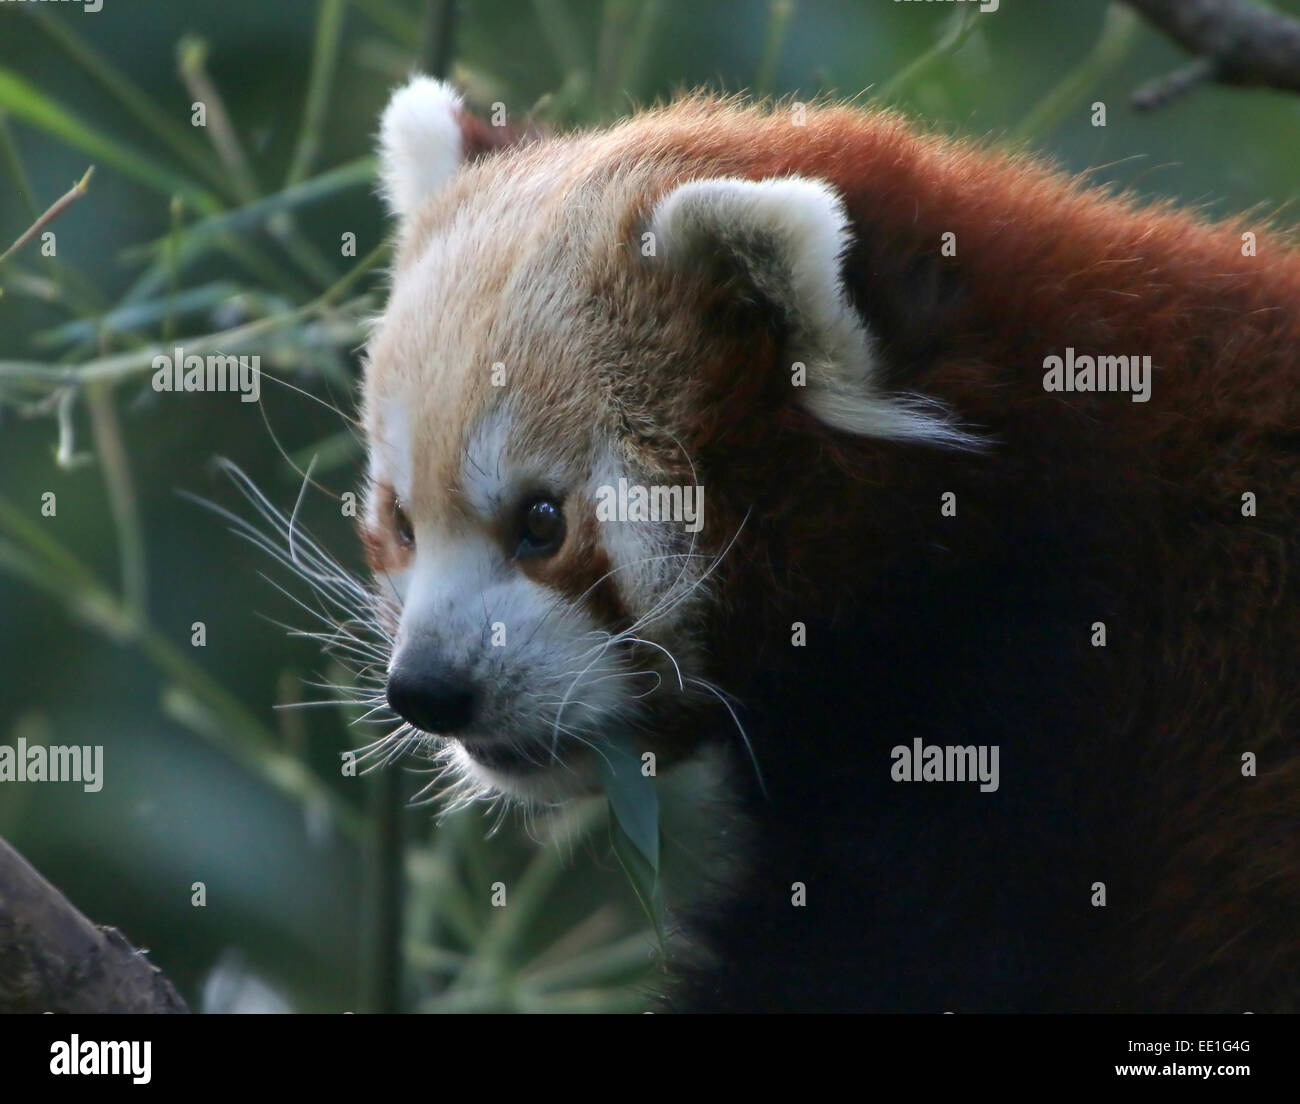 Close-up of the head of an Asian Red Panda (Ailurus fulgens) in a tree, chewing on leaves. Stock Photo